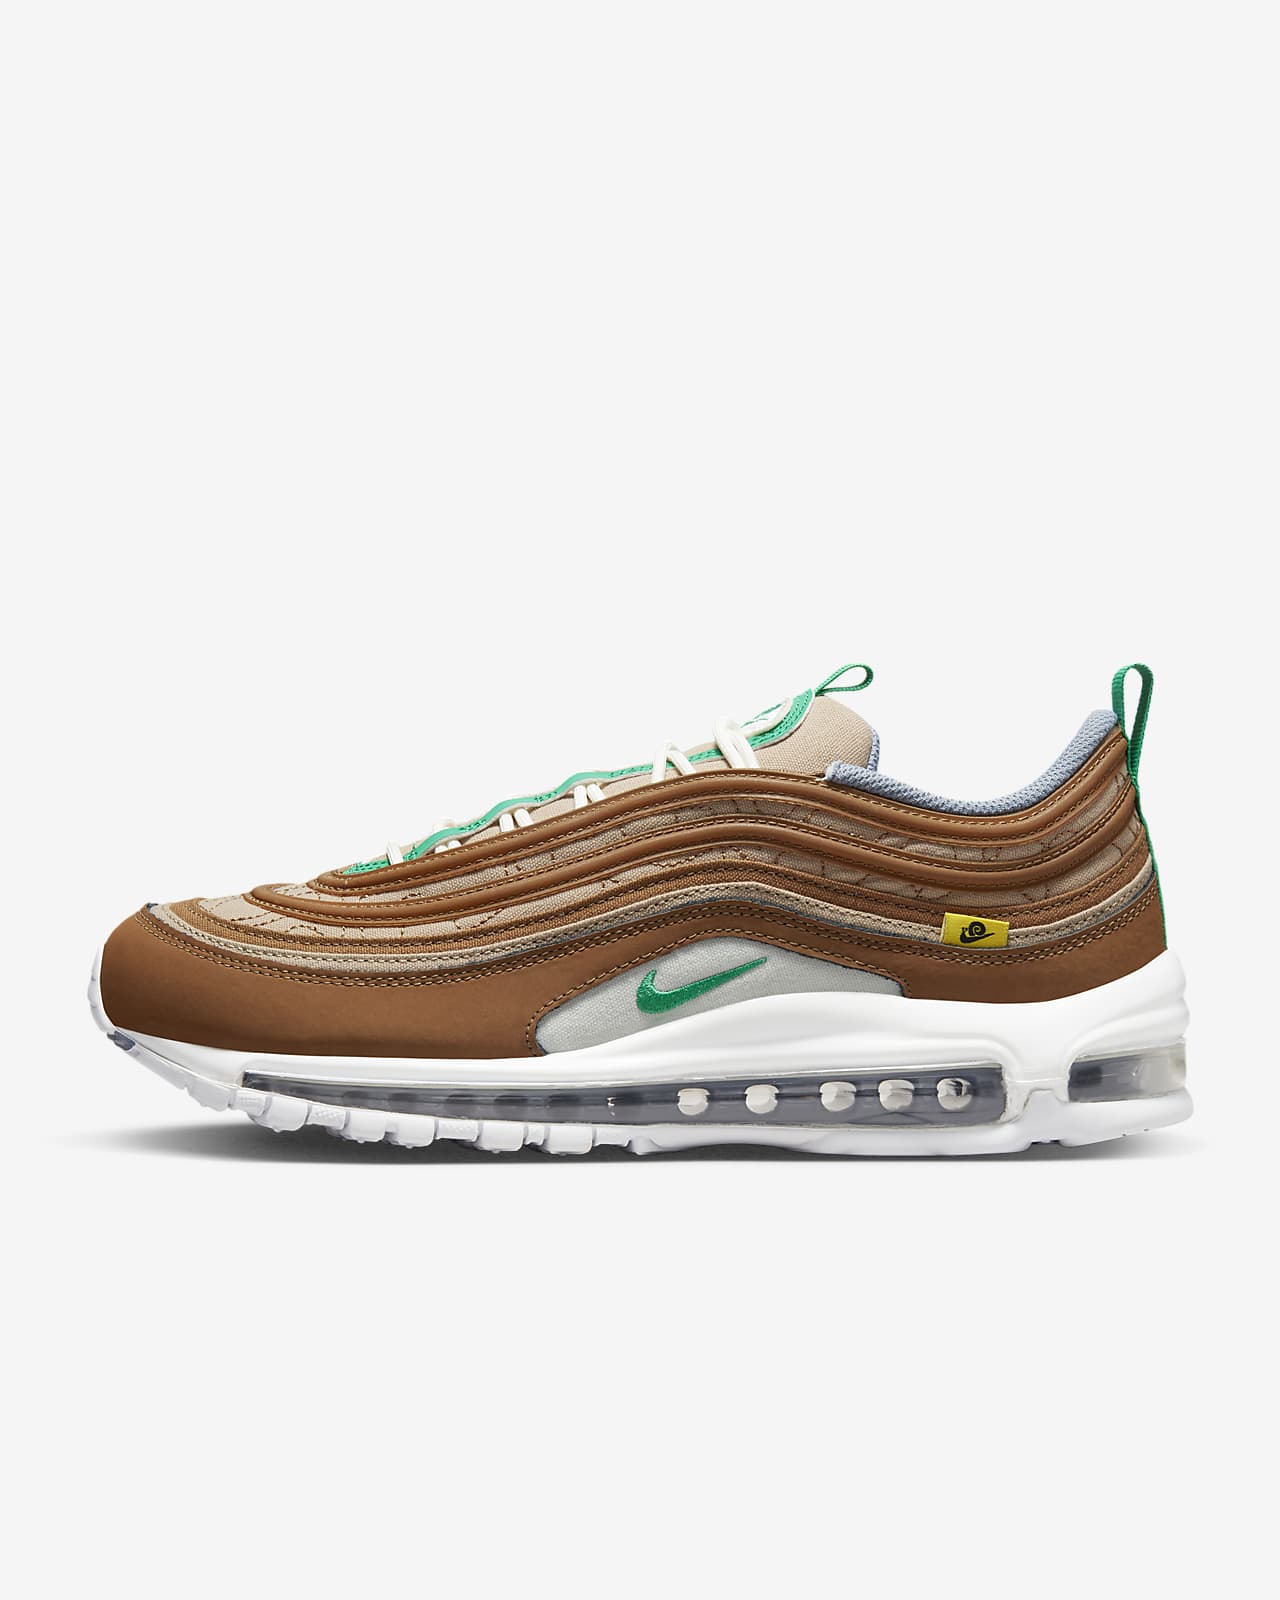 reducir realce Complaciente Nike Air Max 97 SE Men's Shoes. Nike ID